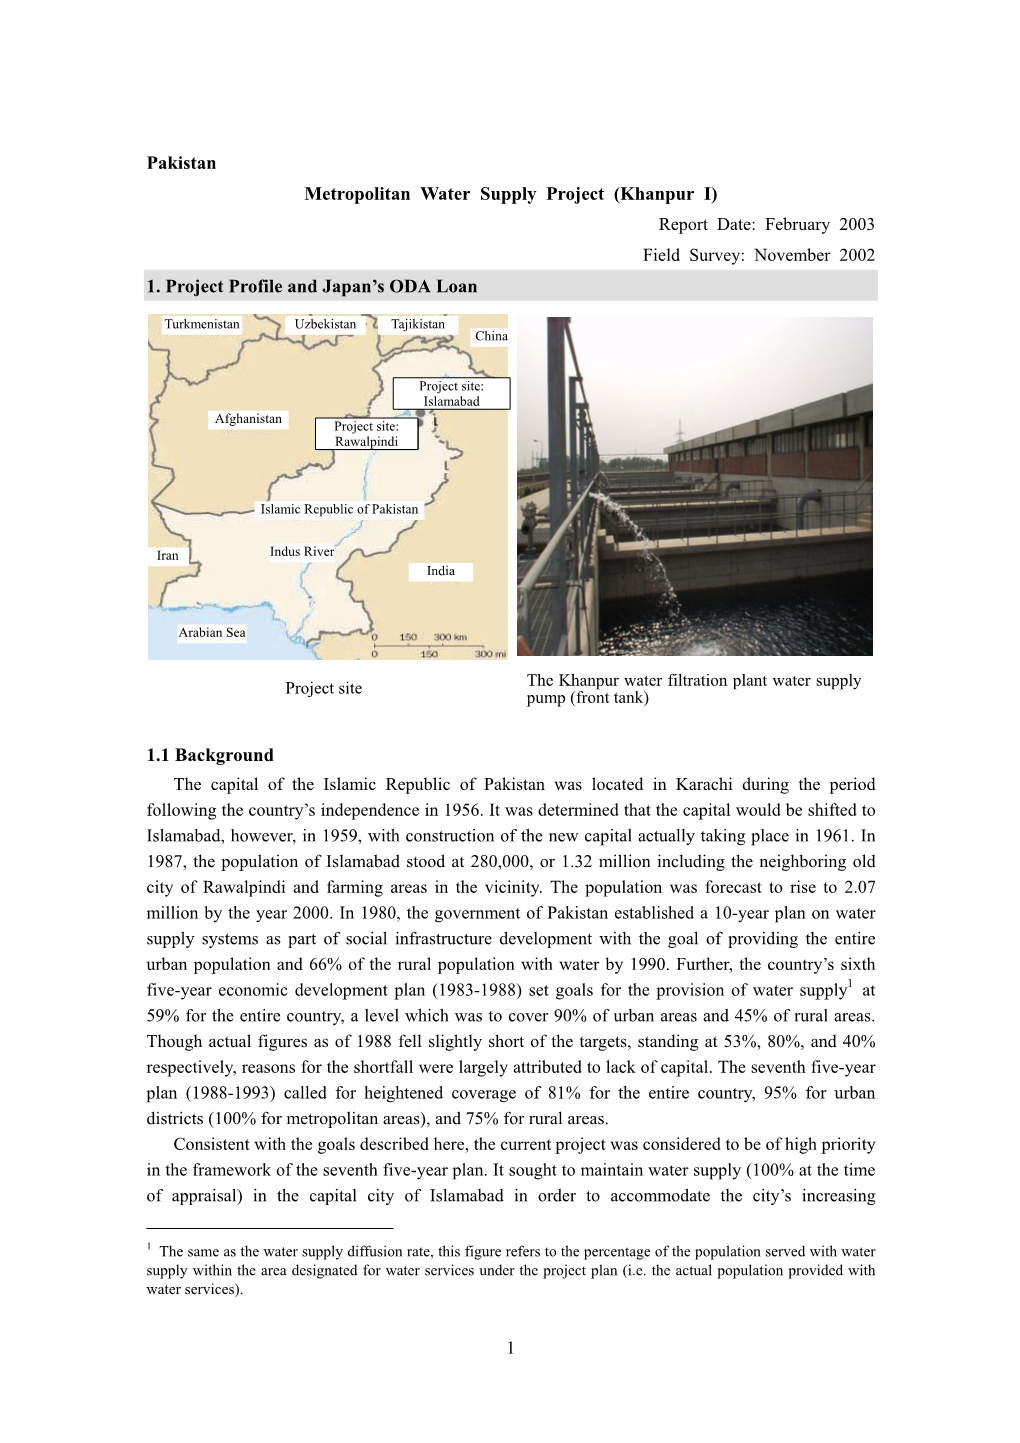 Pakistan Metropolitan Water Supply Project (Khanpur I) 1. Project Profile and Japan's ODA Loan 1.1 Background